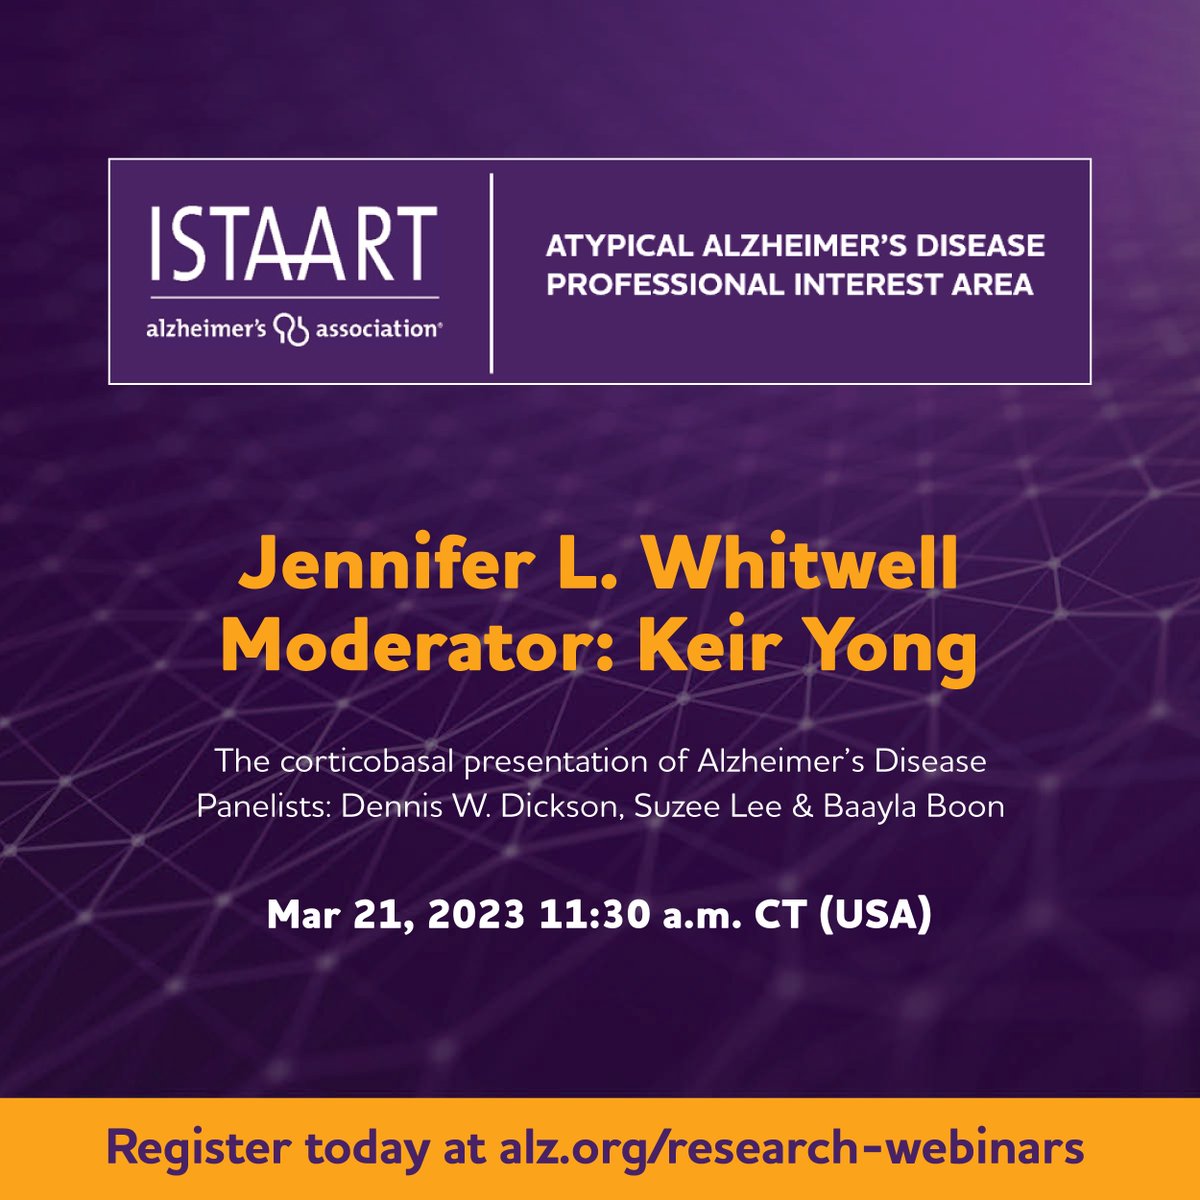 Join us March 21st for a presentation by Dr. Jenny from @NRGMayo on the corticobasal presentation of #Alzheimers Disease. @KeirYong will moderate the session. Panel consists of @lee_suzee @dennis_w_d @BaaylaB . Register here: alz-org.zoom.us/webinar/regist… @alzassociation @ISTAART